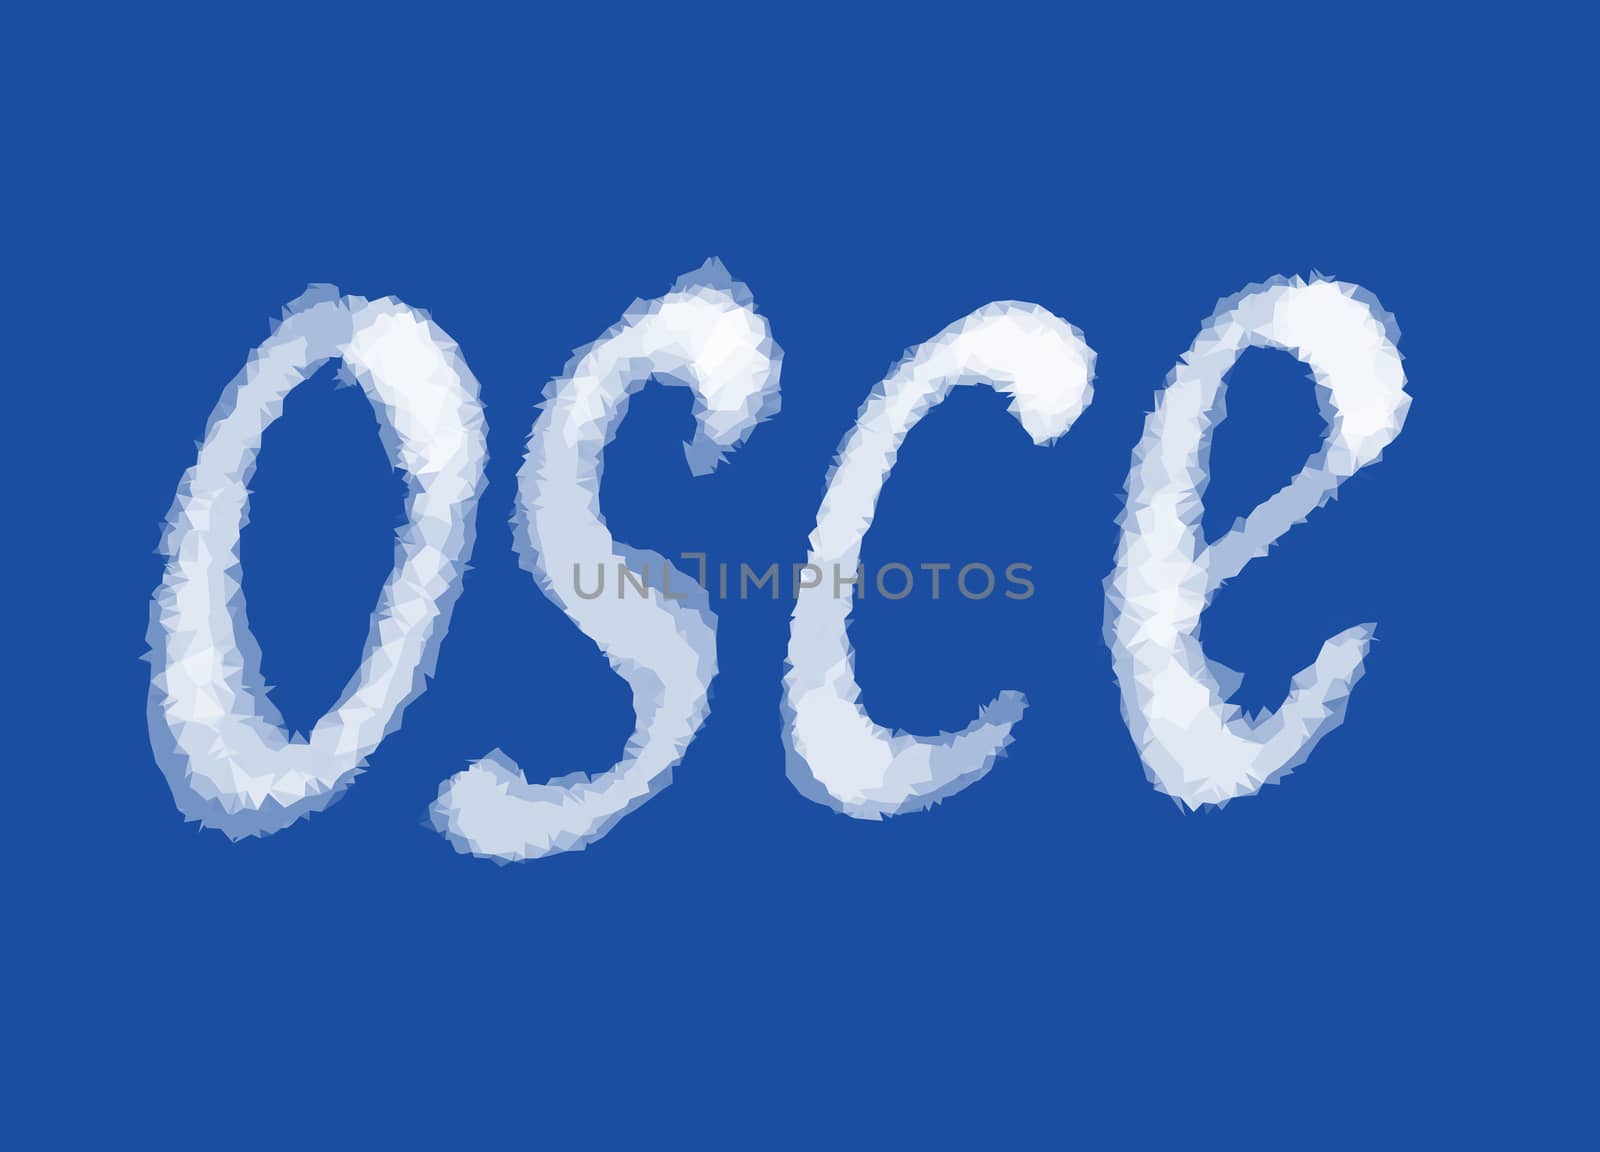 OSCE lettering lowploly of many triangles background for use in design.